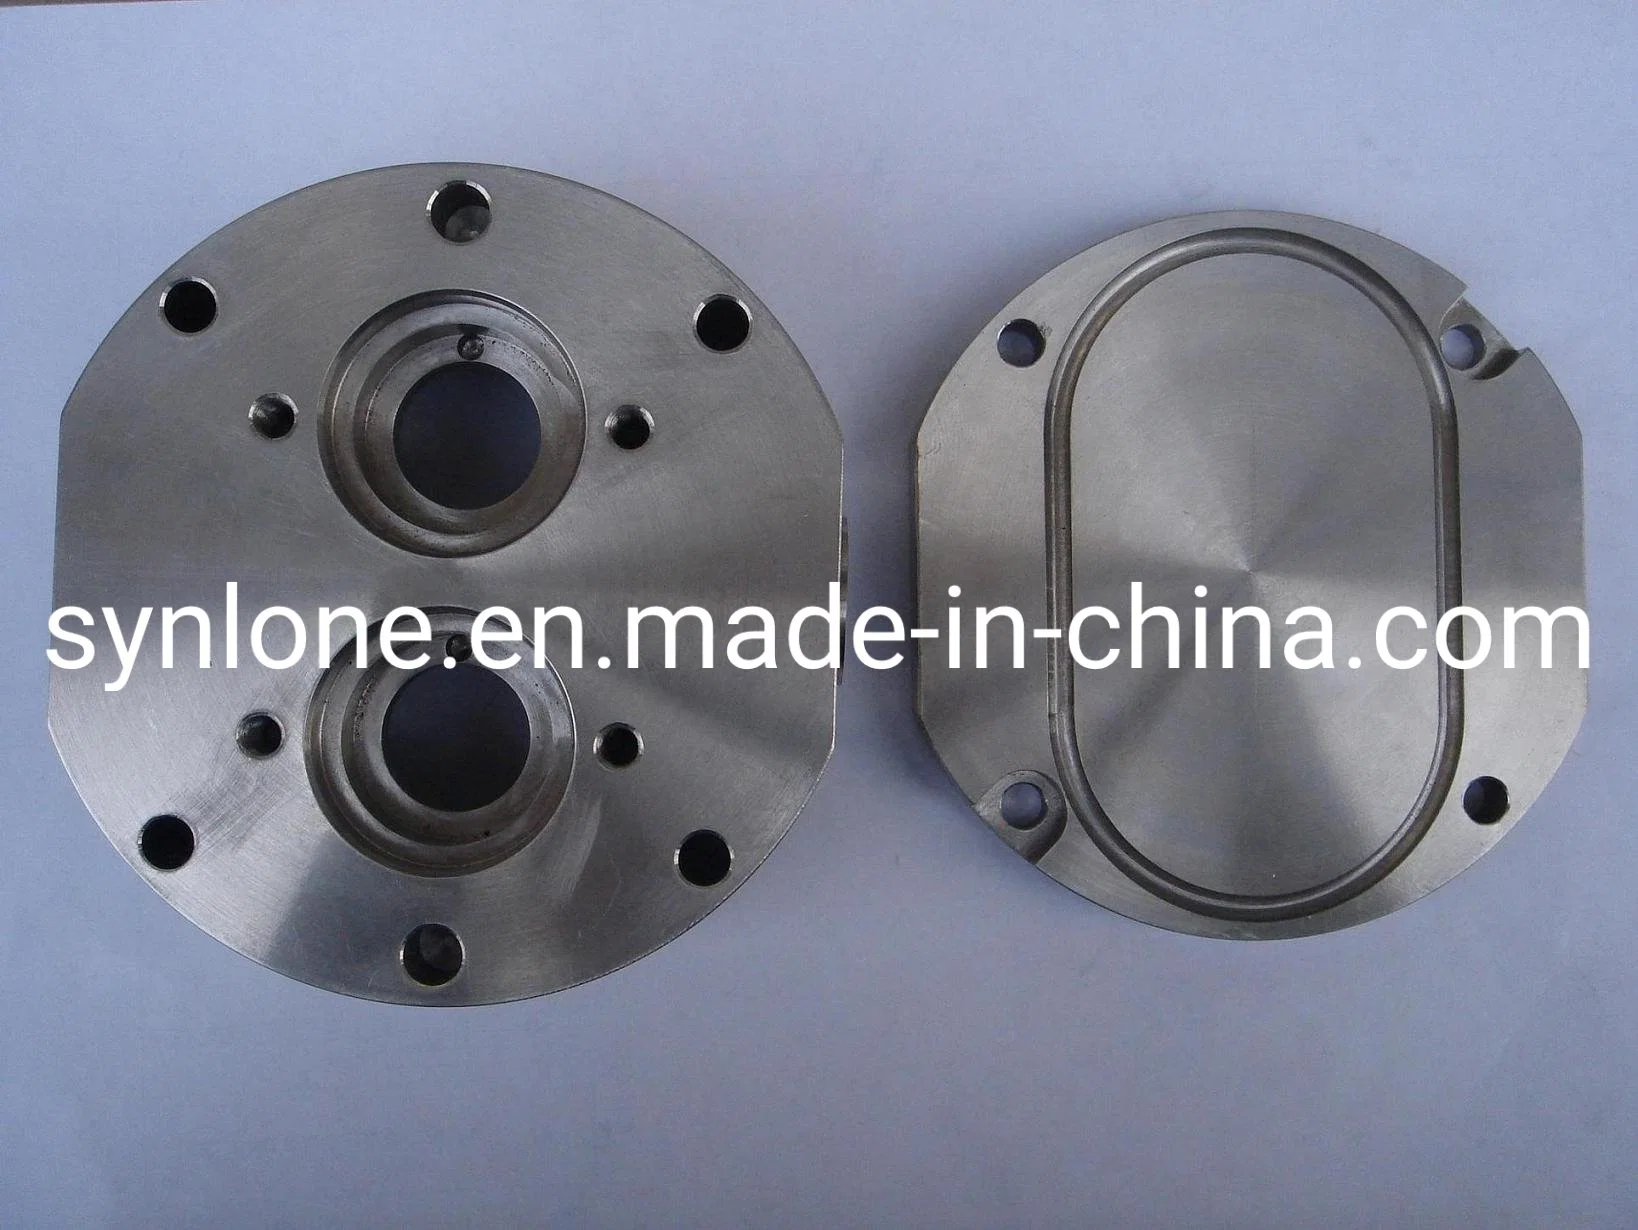 Stainless Steel/Carbon Steel Made by Investment Casting